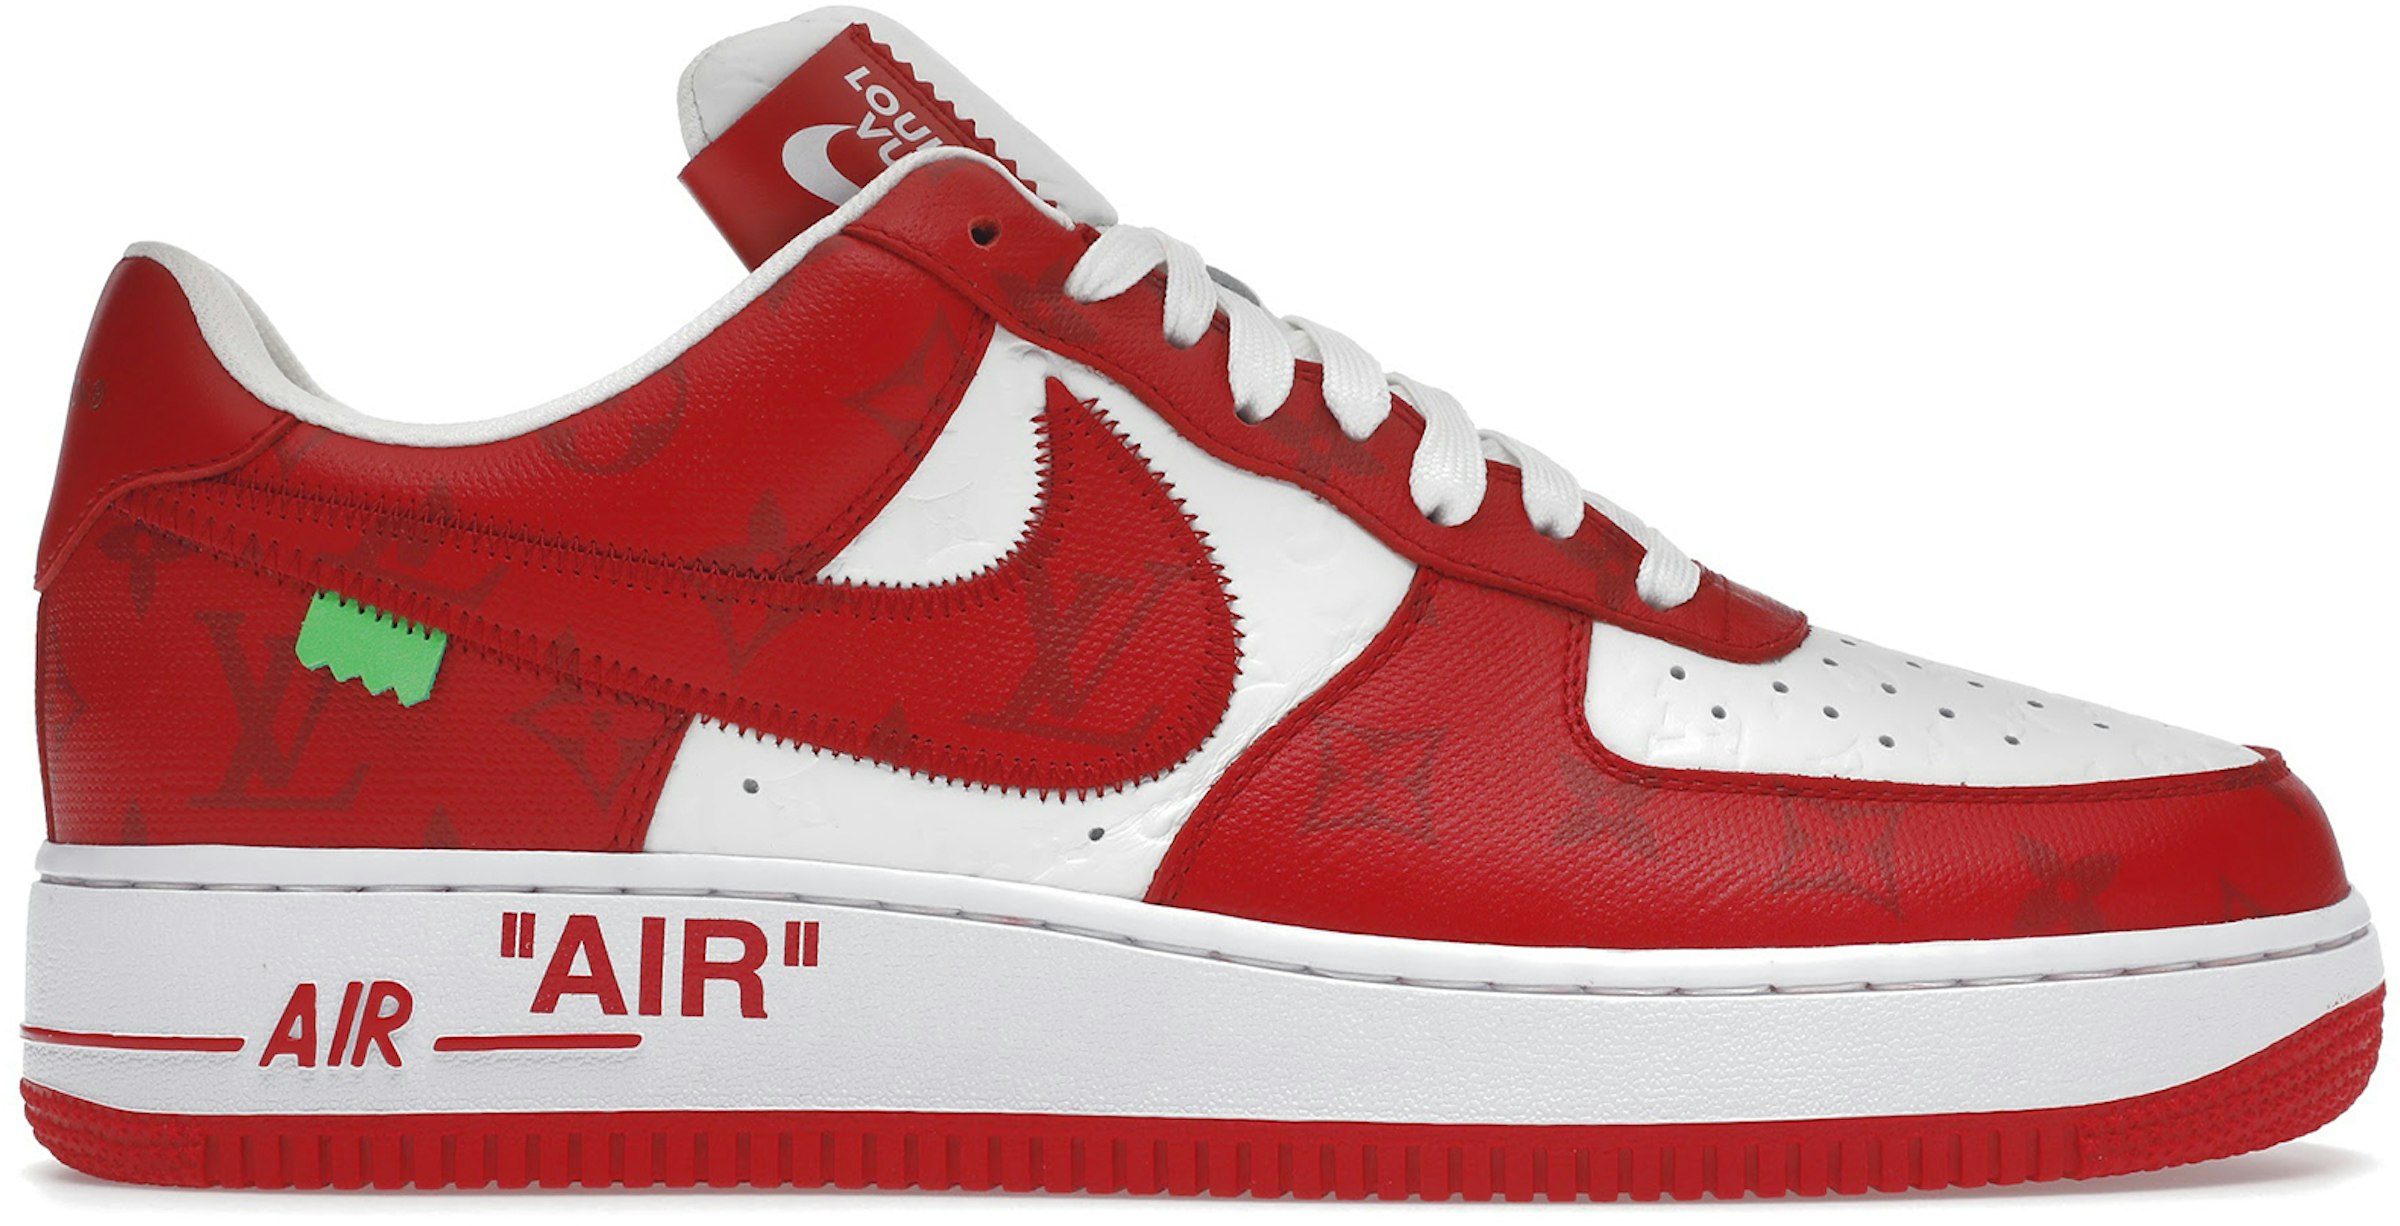 Vuitton Nike Air Force 1 Low Virgil Abloh White Red - US